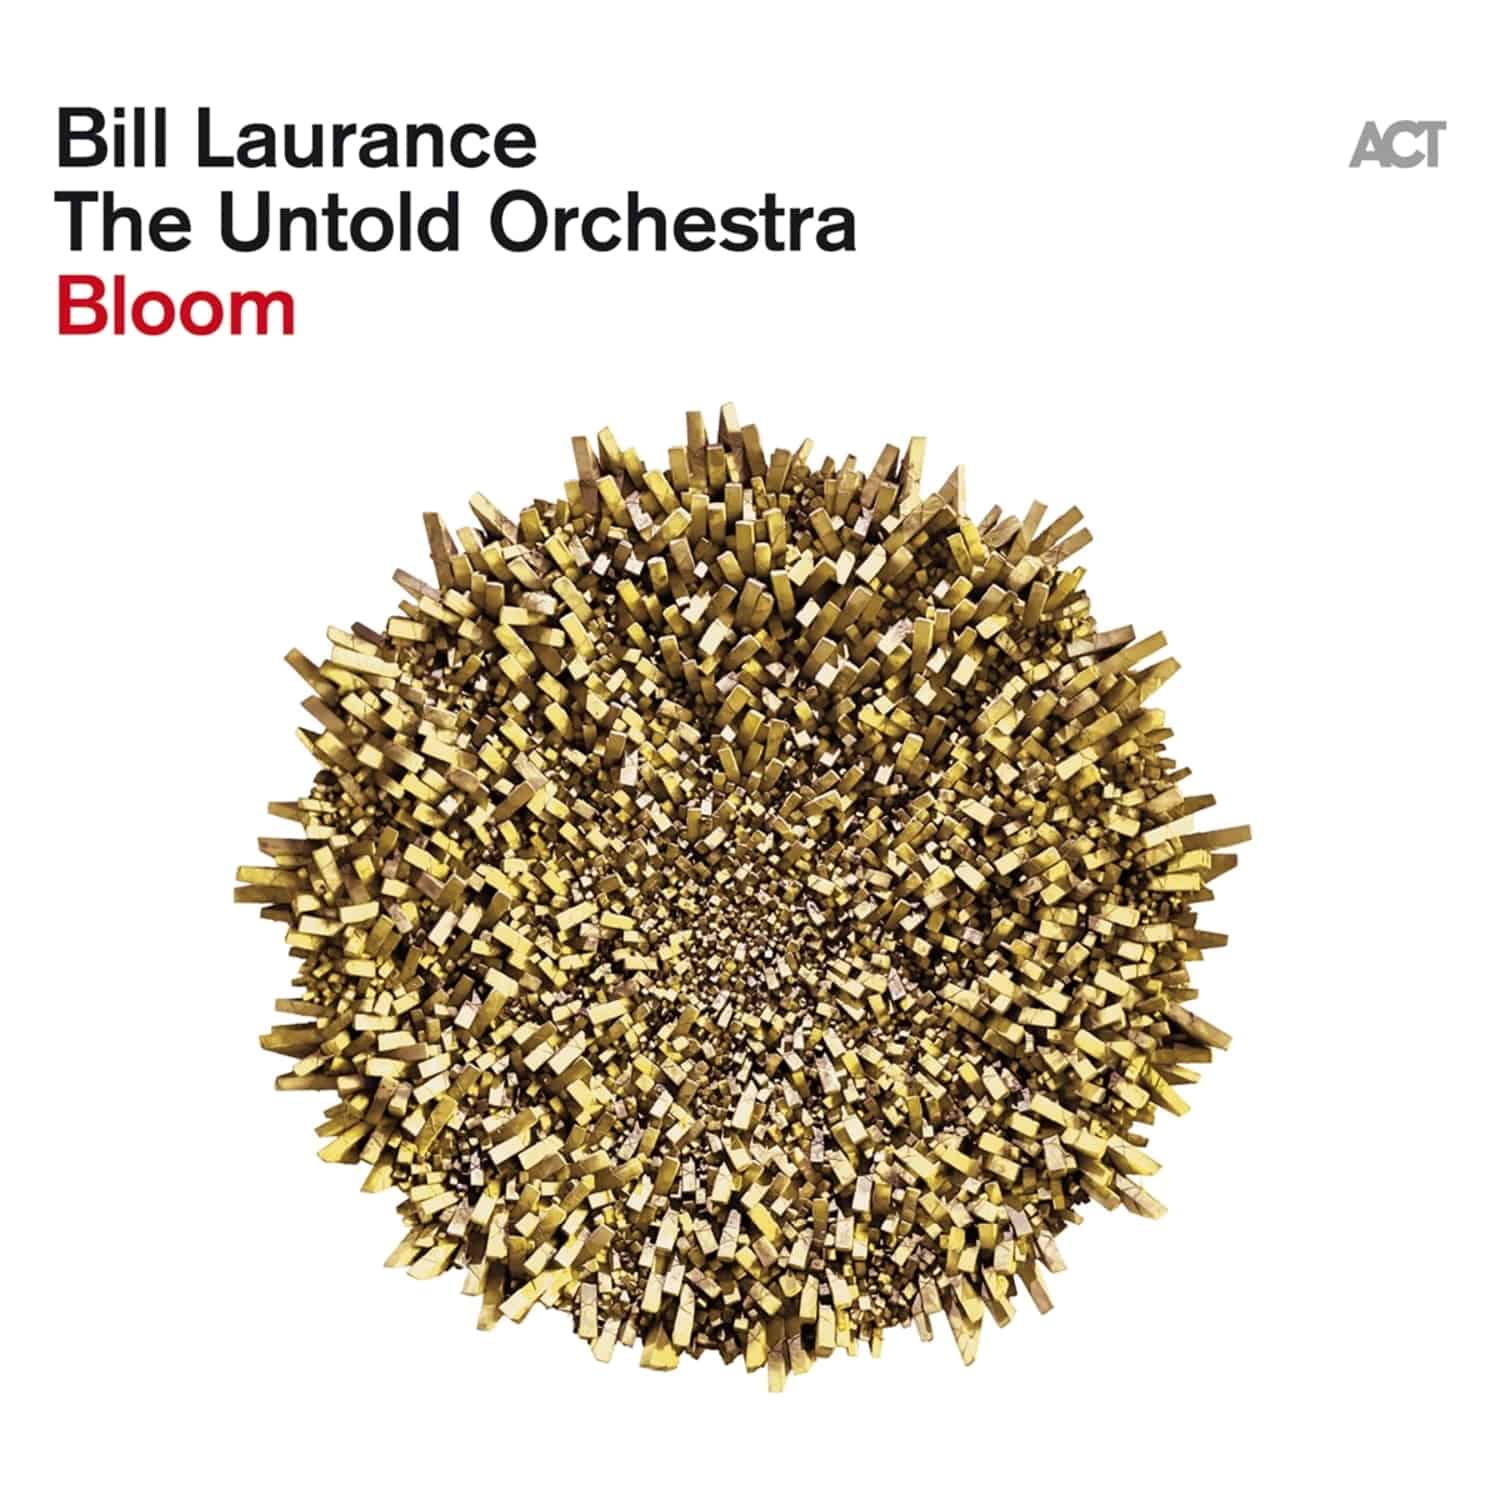 Bill&The Untold Orchestra Laurance - BLOOM 